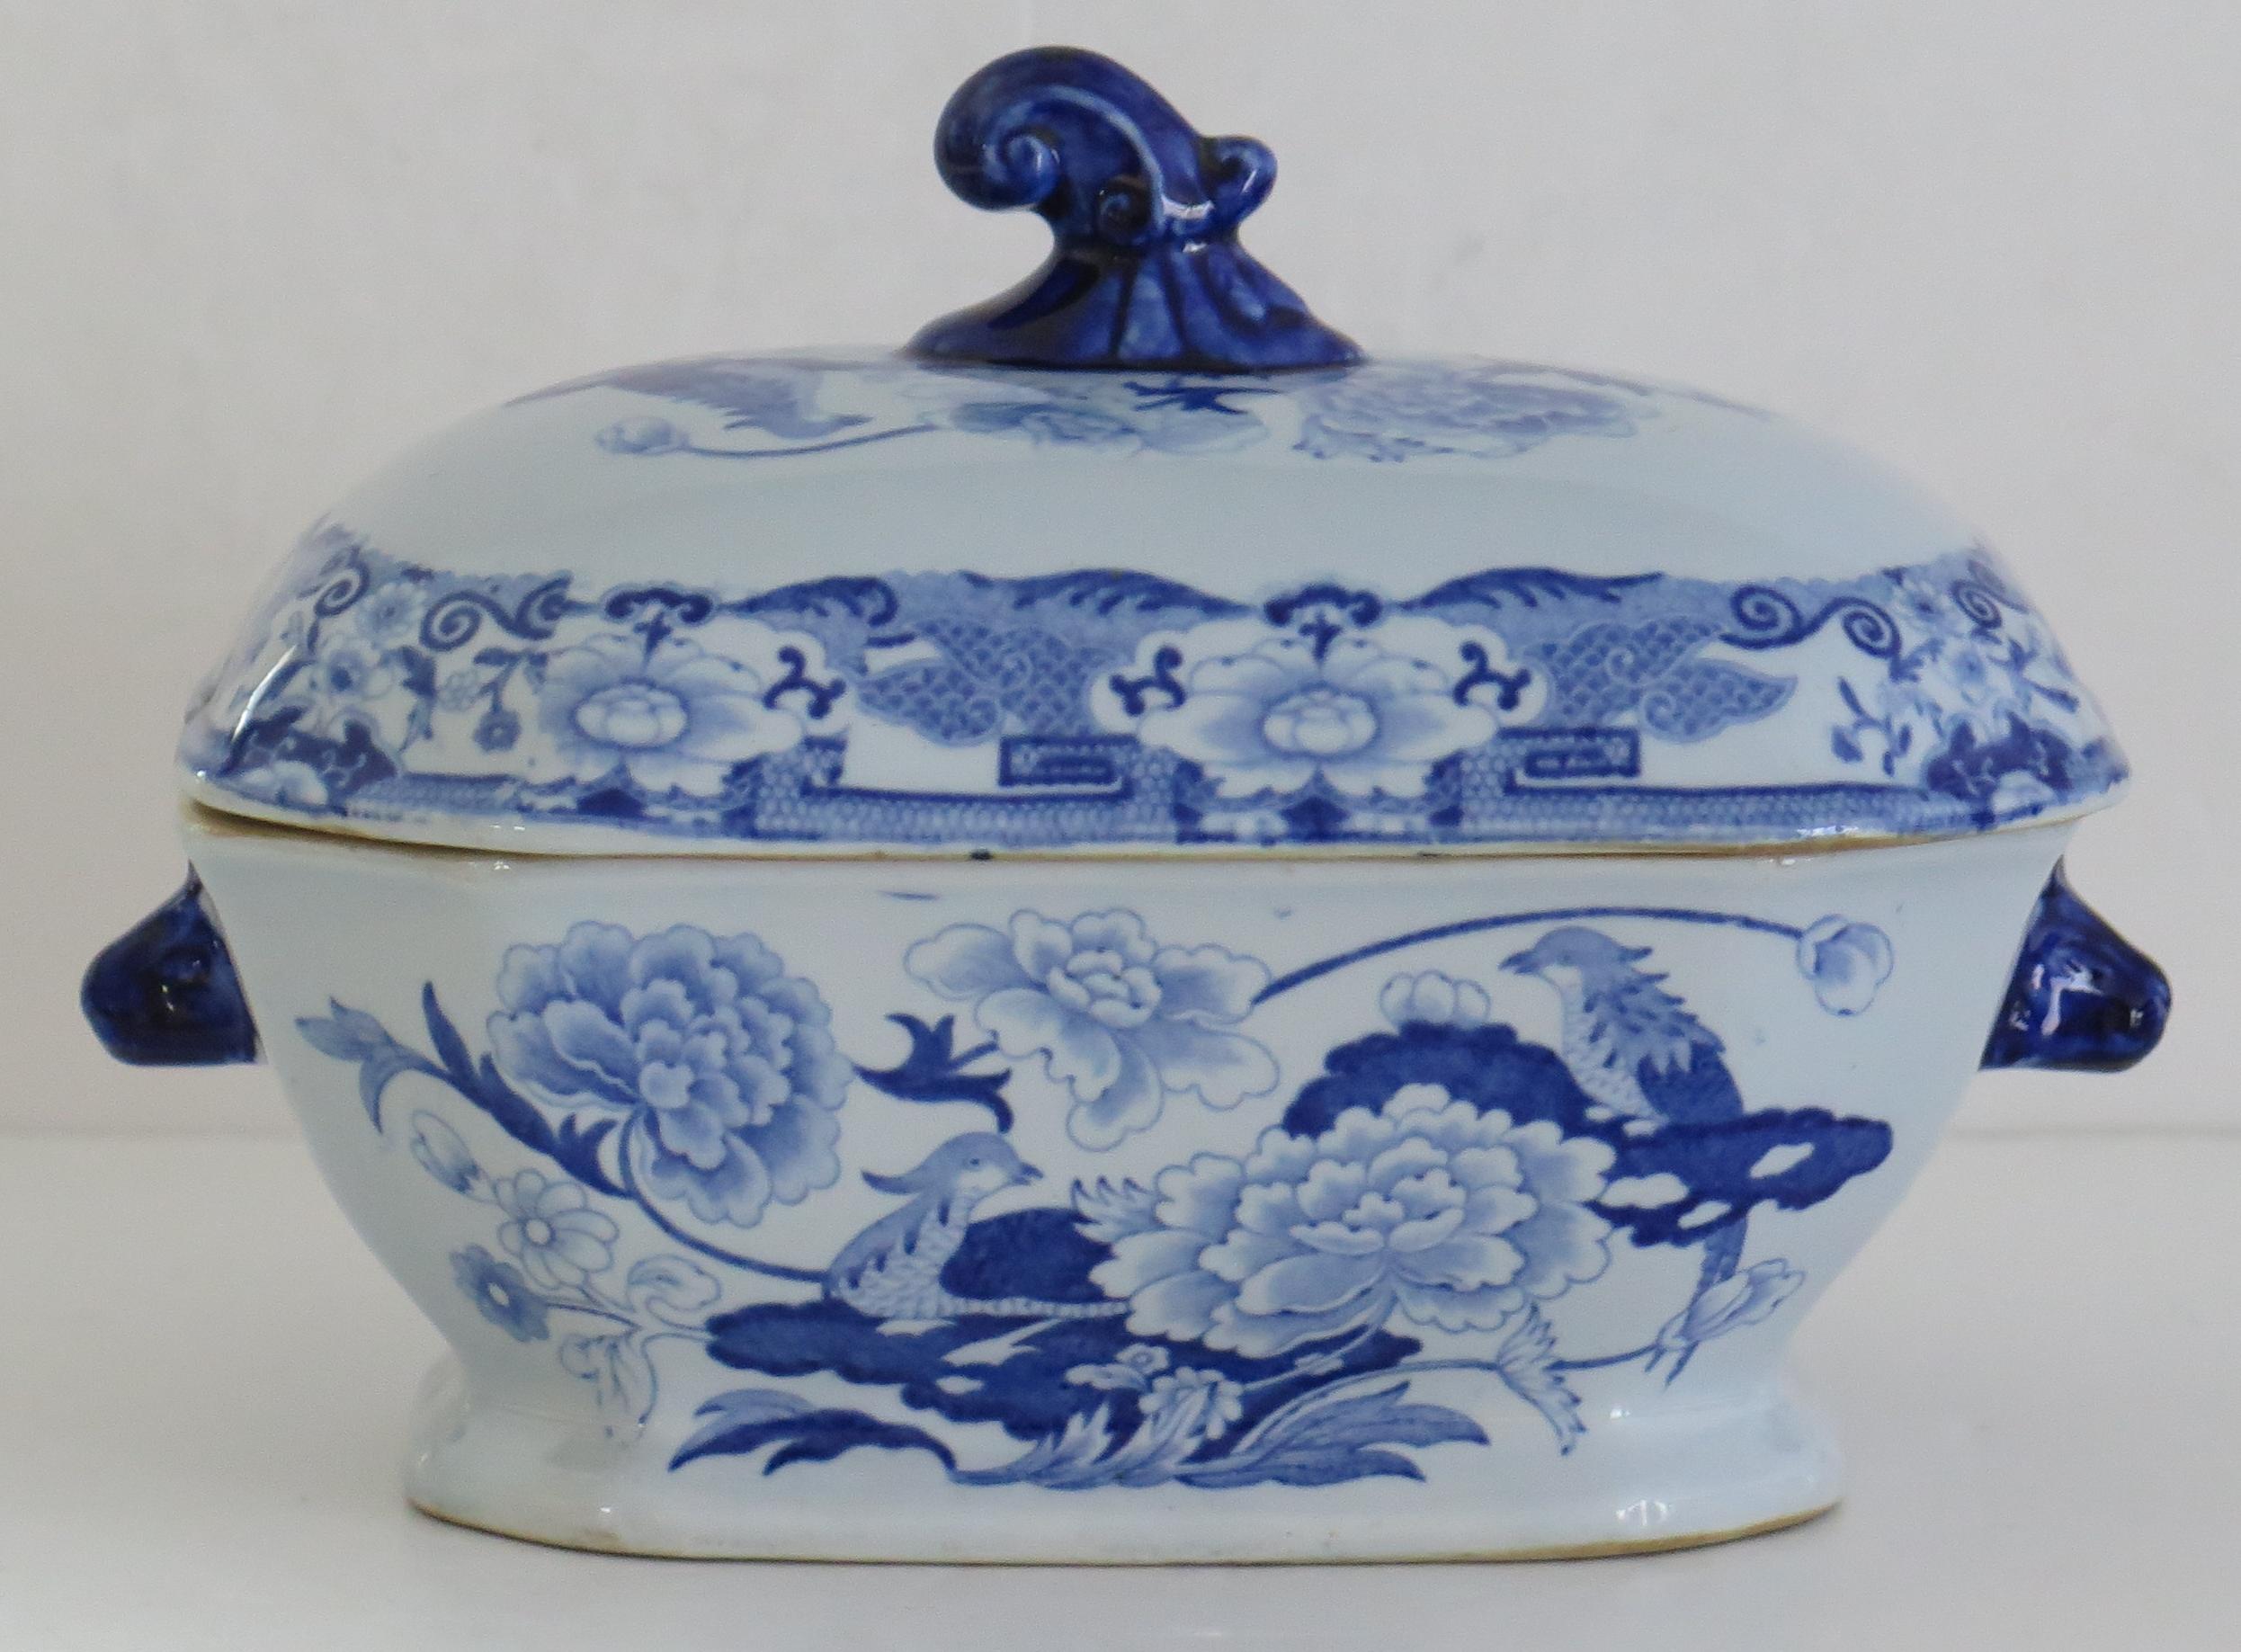 This is a good Ironstone Sauce Tureen, complete with lid, made by Mason's of Lane Delph, Staffordshire, England, during the early part of the 19th century, circa 1815.

This tureen is well potted with a rectangular curved shape on a low foot.